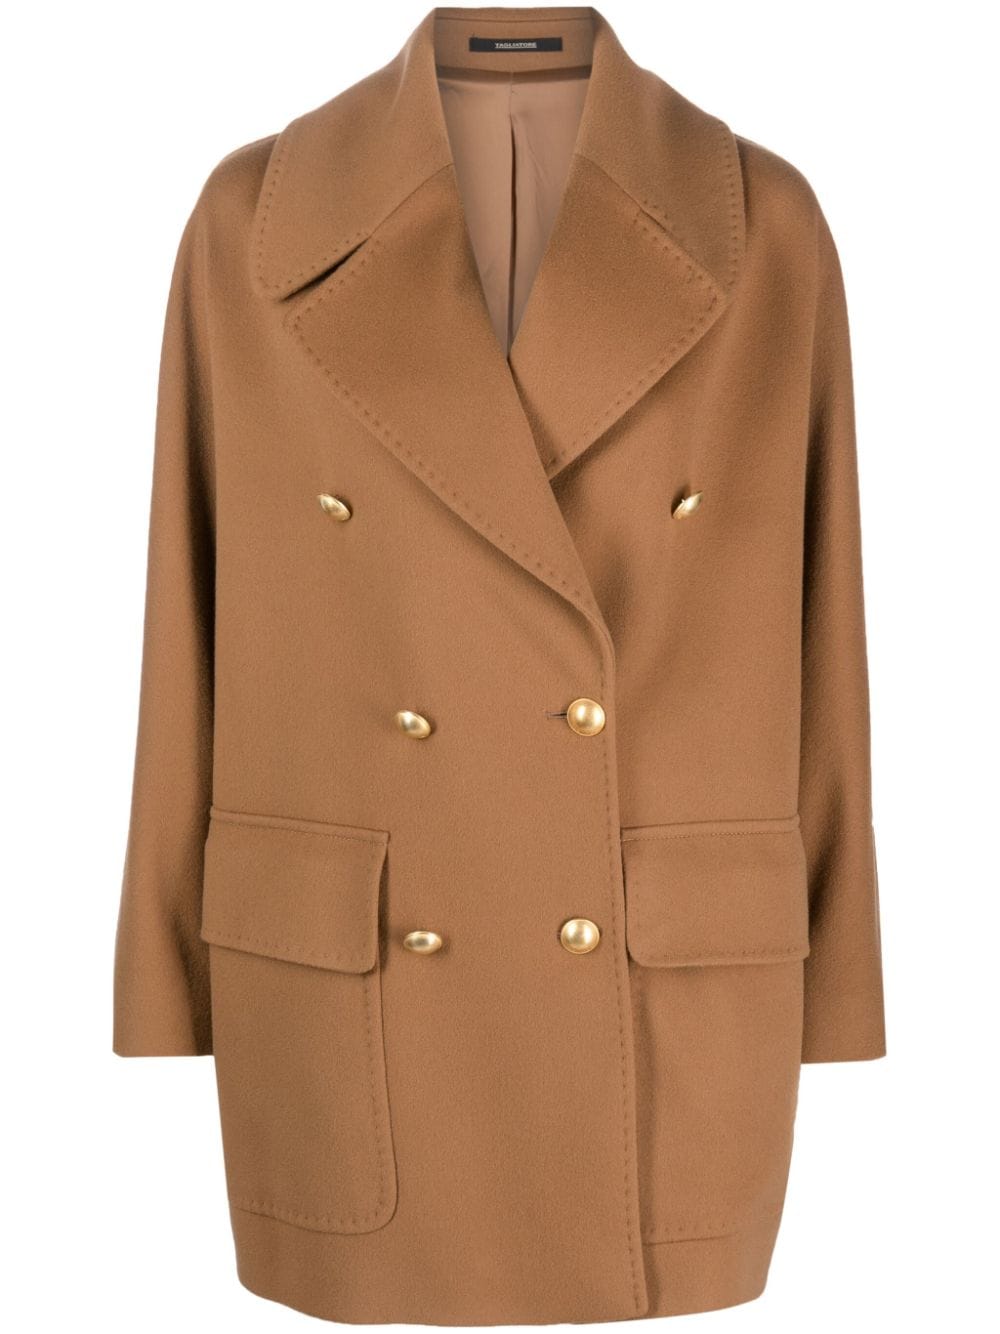 Tagliatore double-breasted notched coat - Marrone